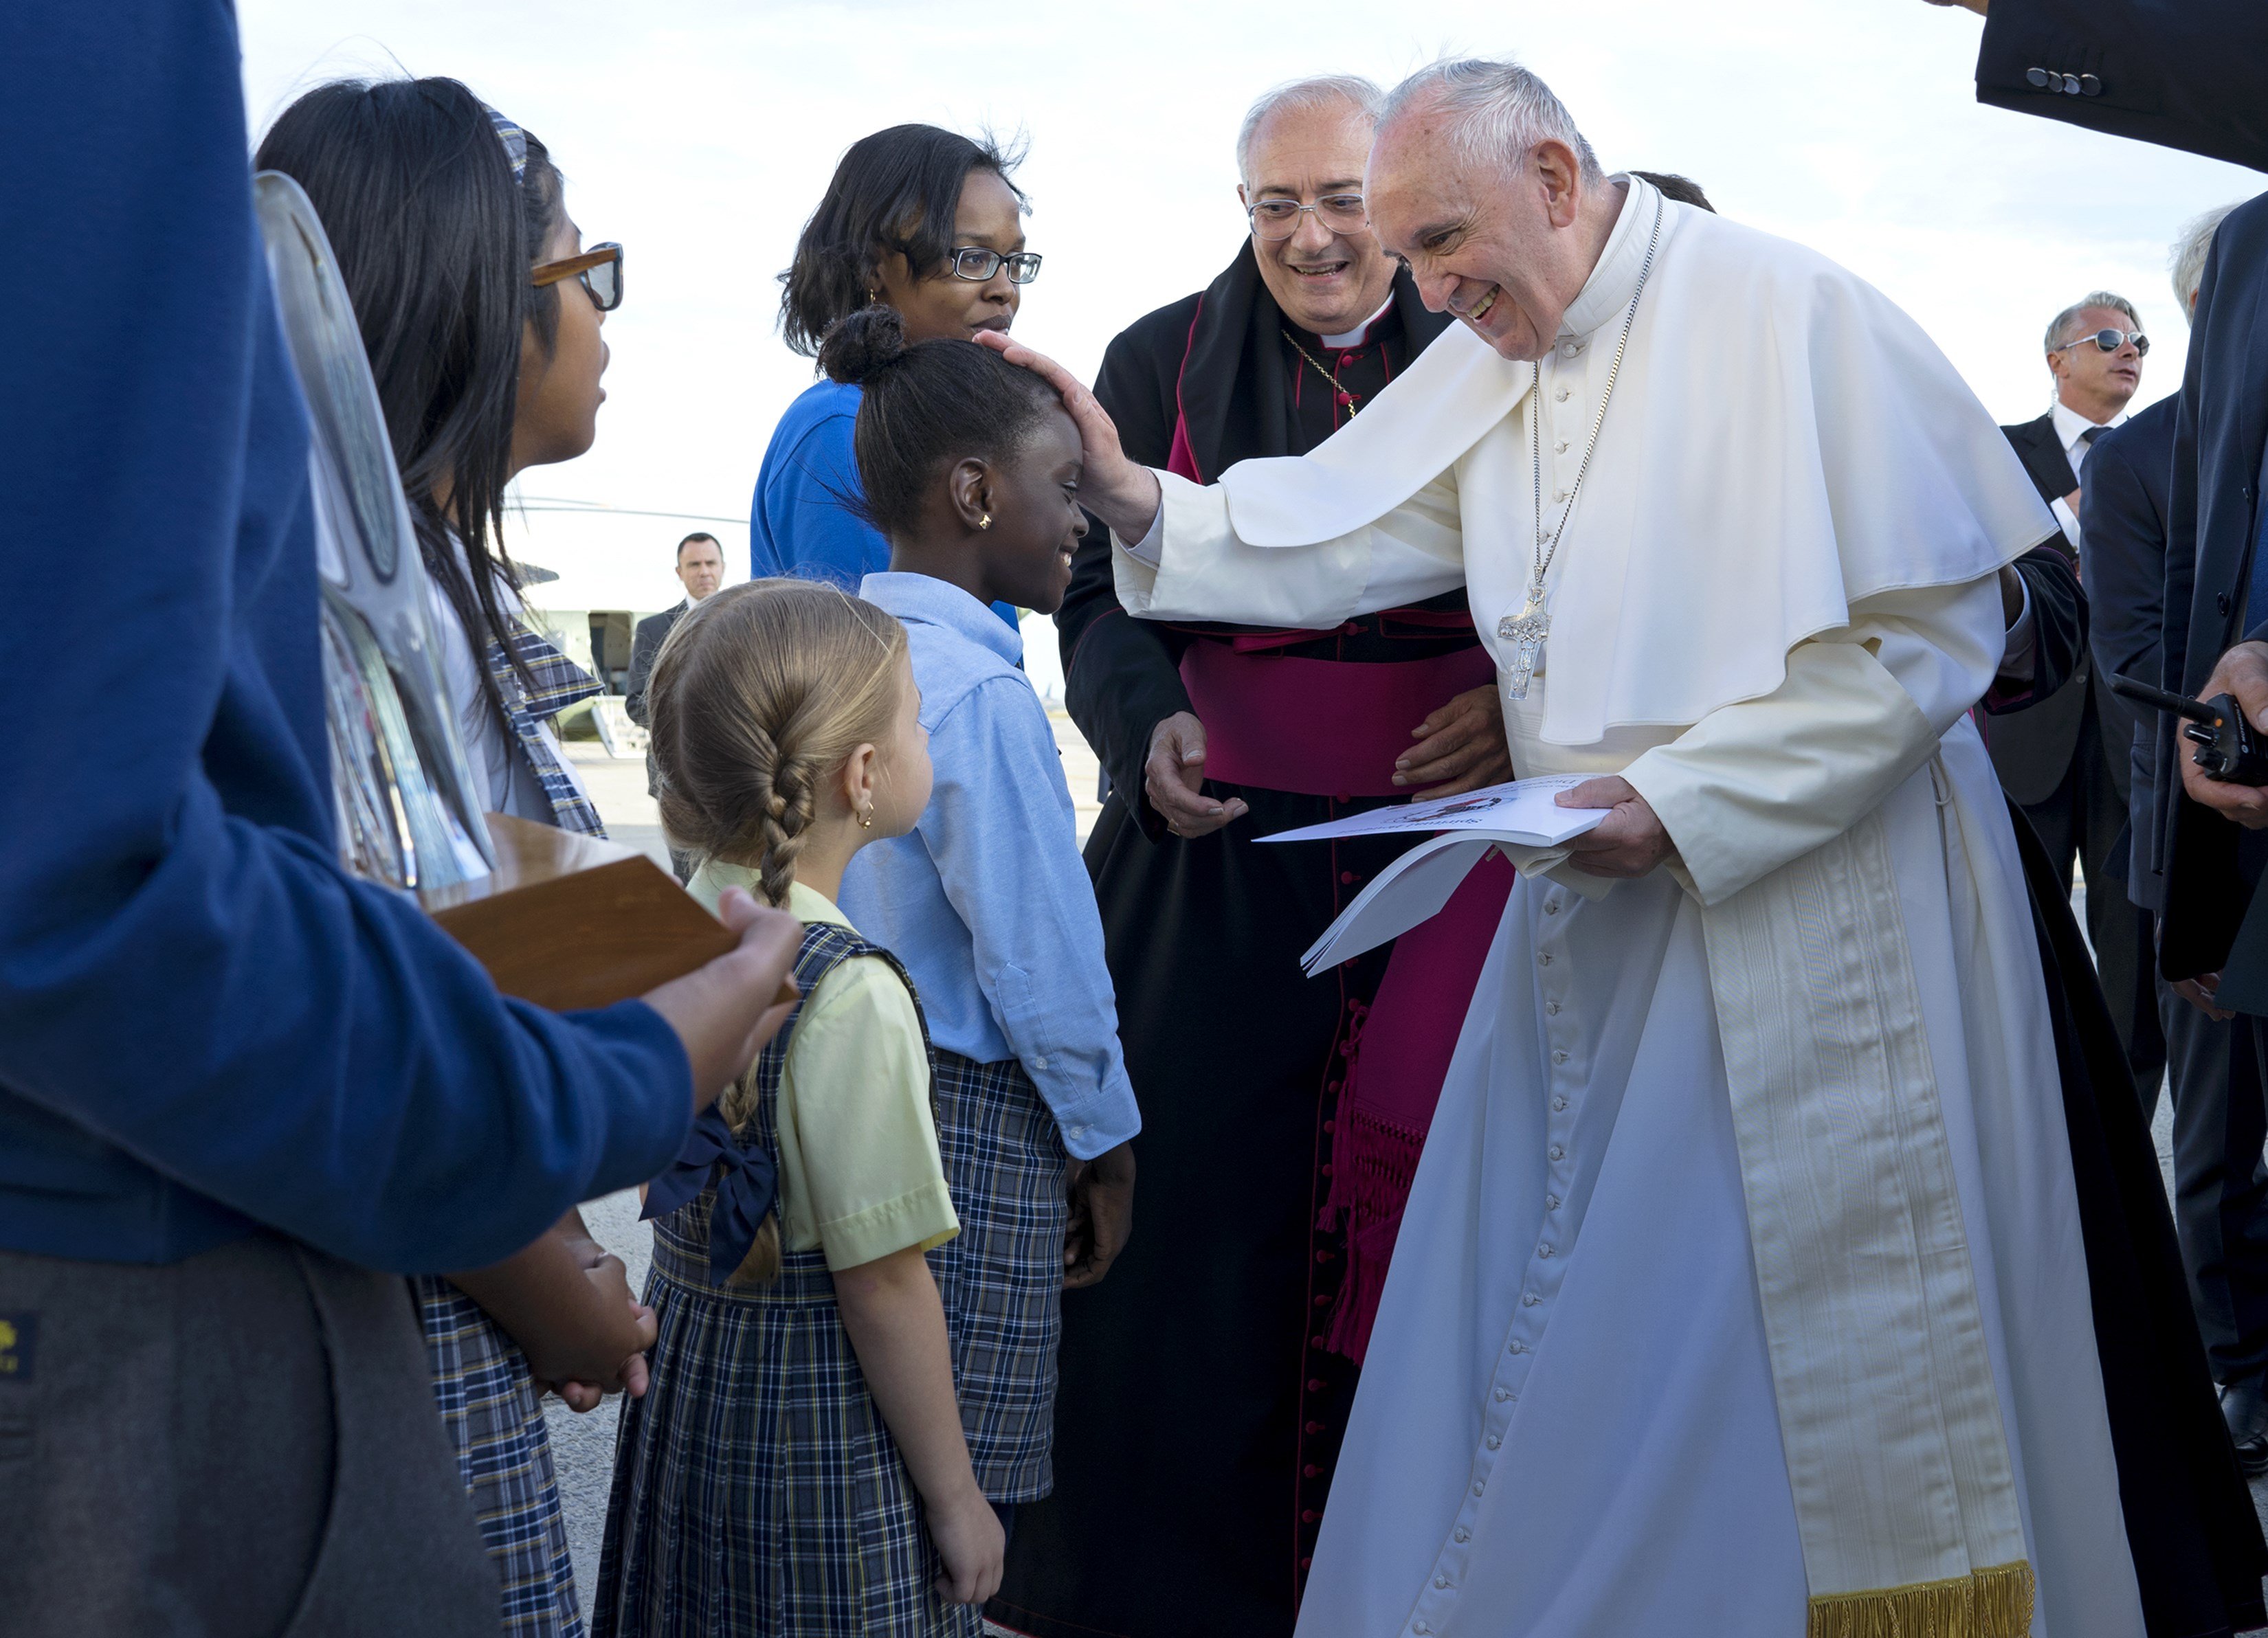 Pope Francis reaches out to 5th grader Omodele Ojo of East New York, Brooklyn as he is greeted as he arrives at John F. Kennedy International Airport on Sept. 24, 2015, in New York.